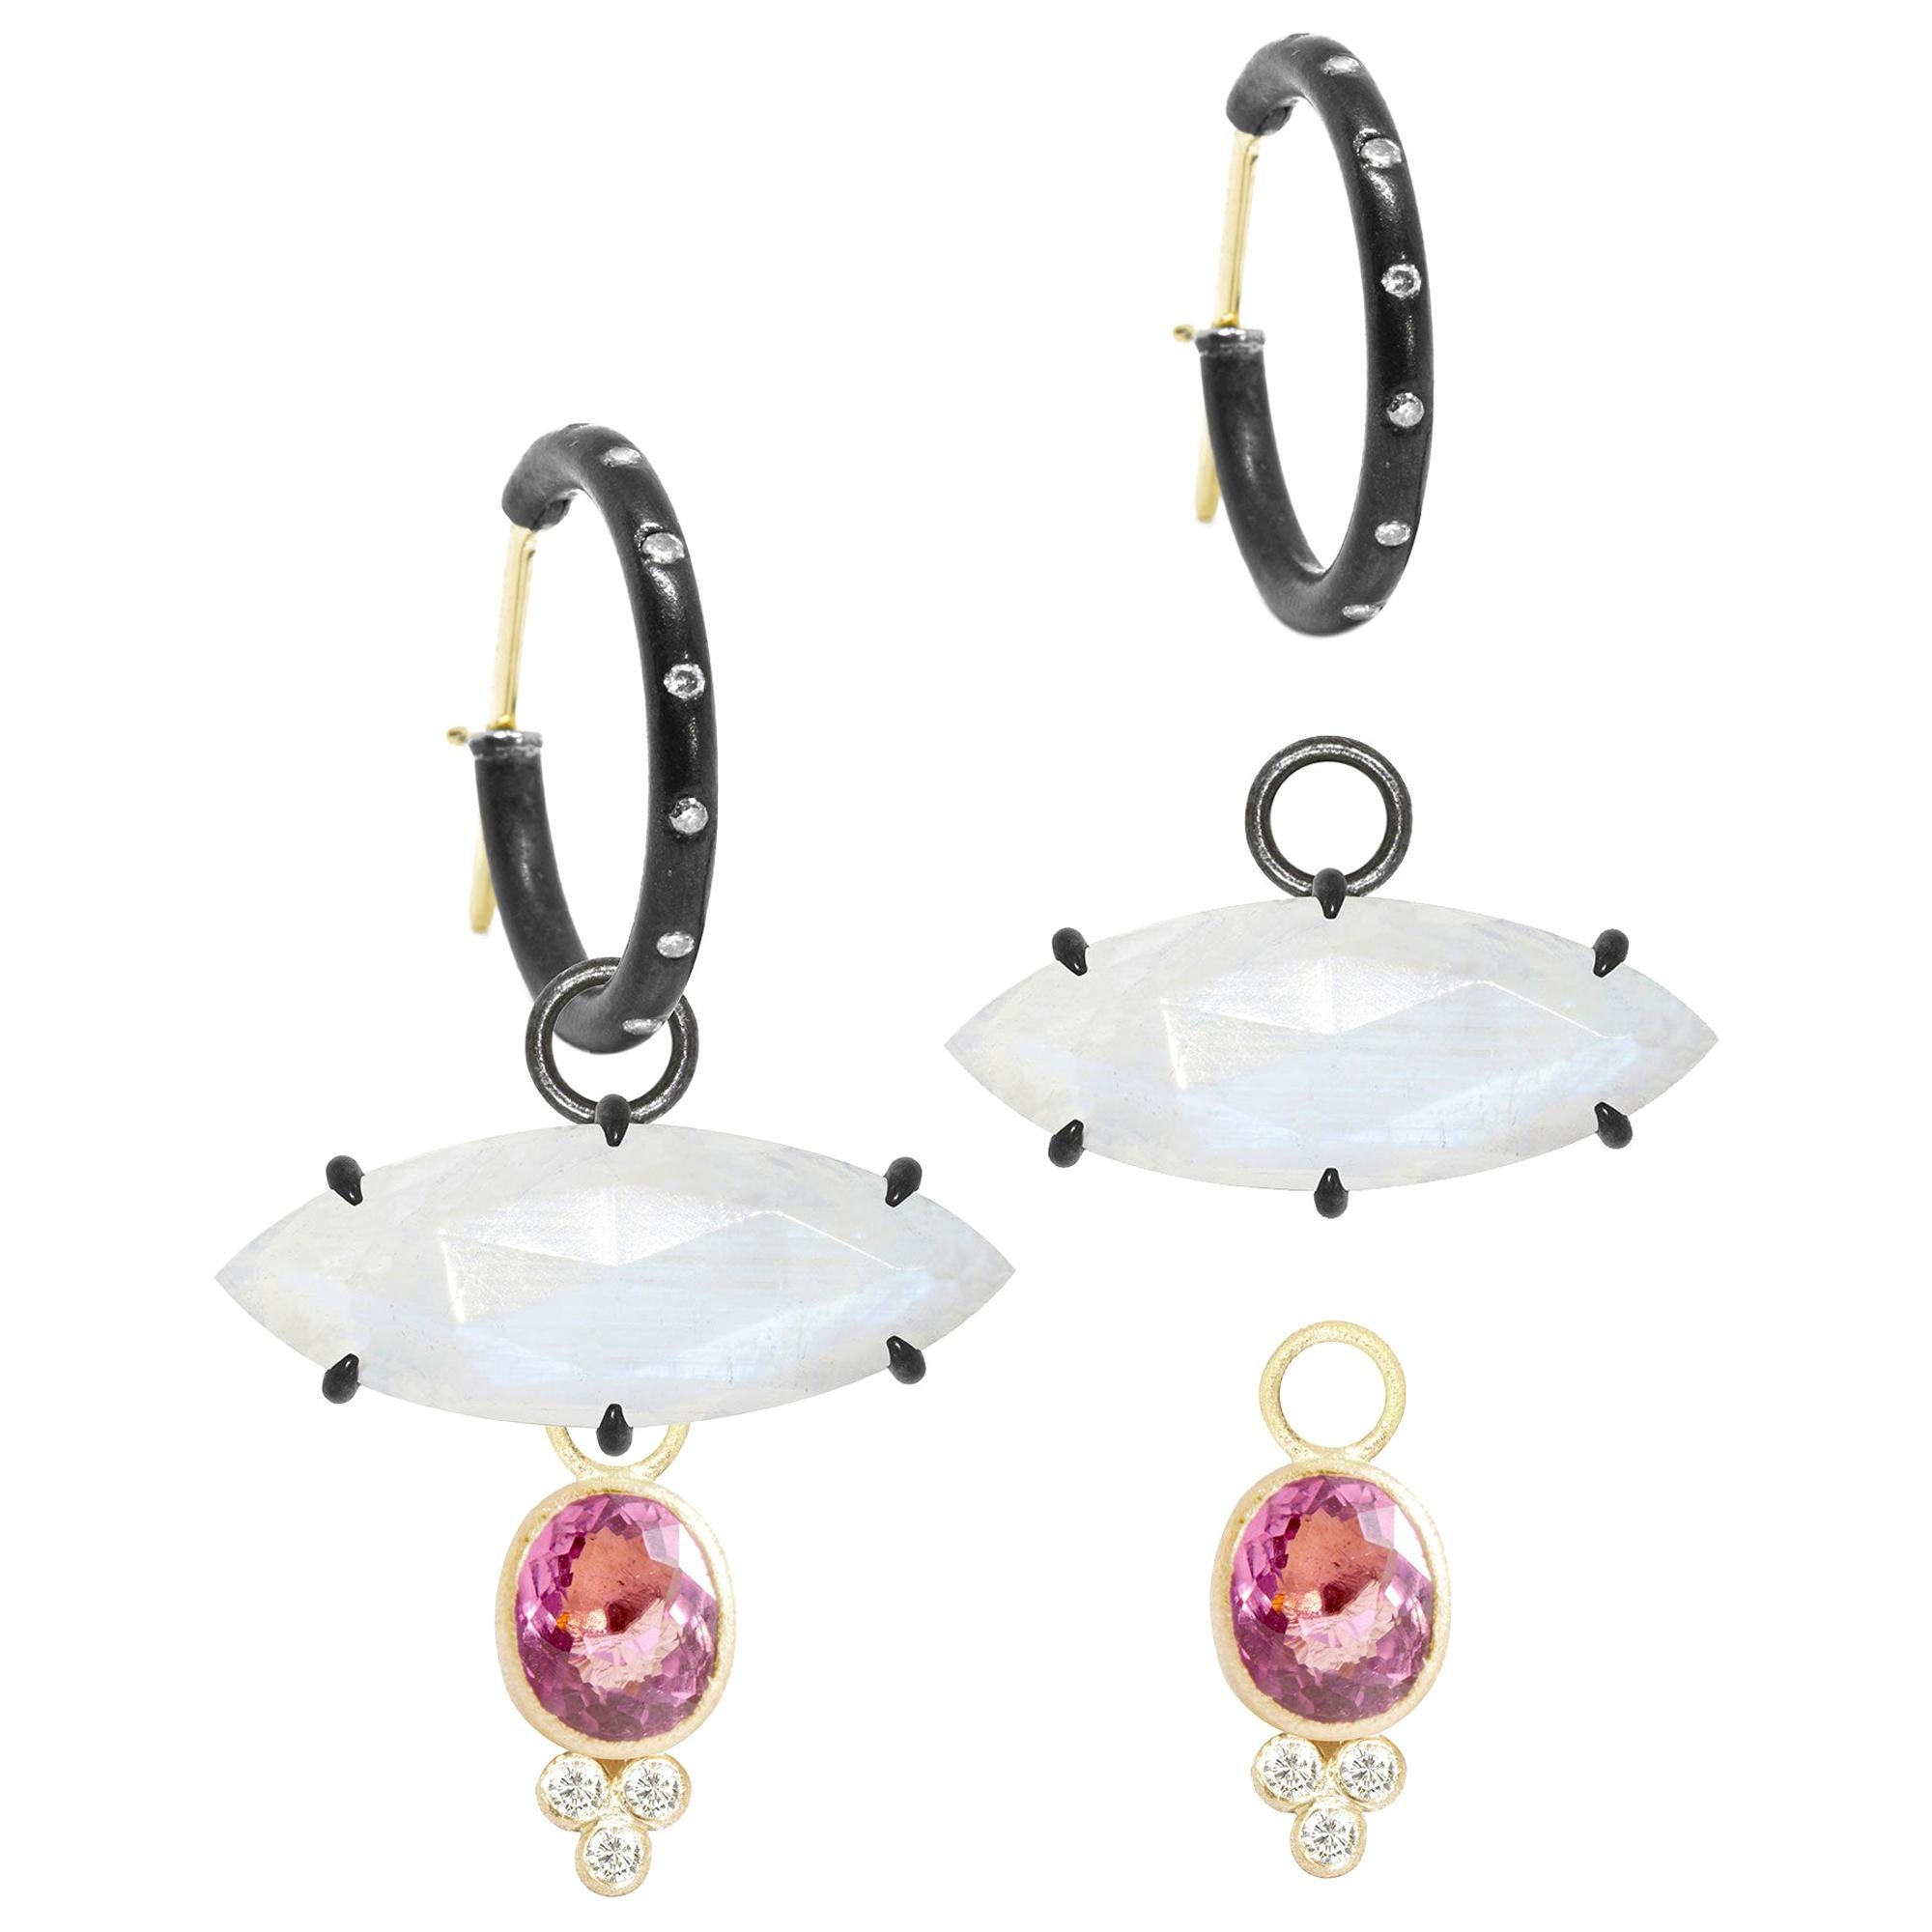 Boucles d'oreilles Mekong Med Moonstone Oxidized and Lilly Pink Tourmaline en or 18 carats